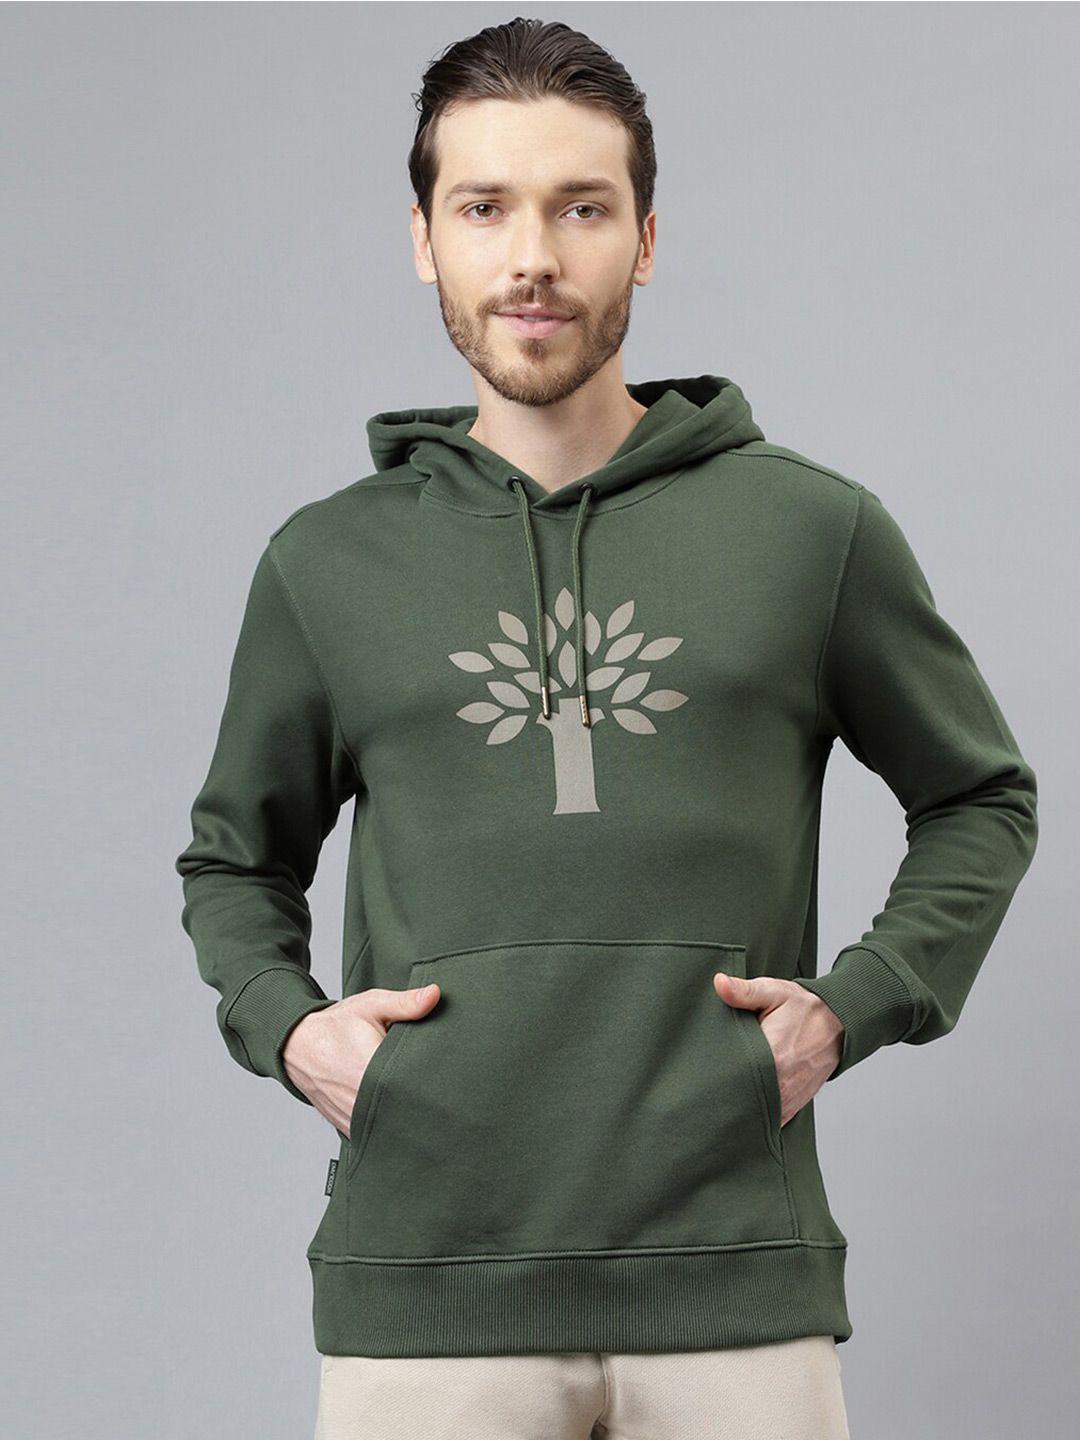 woodland graphic printed hooded neck long sleeve pullover sweatshirt